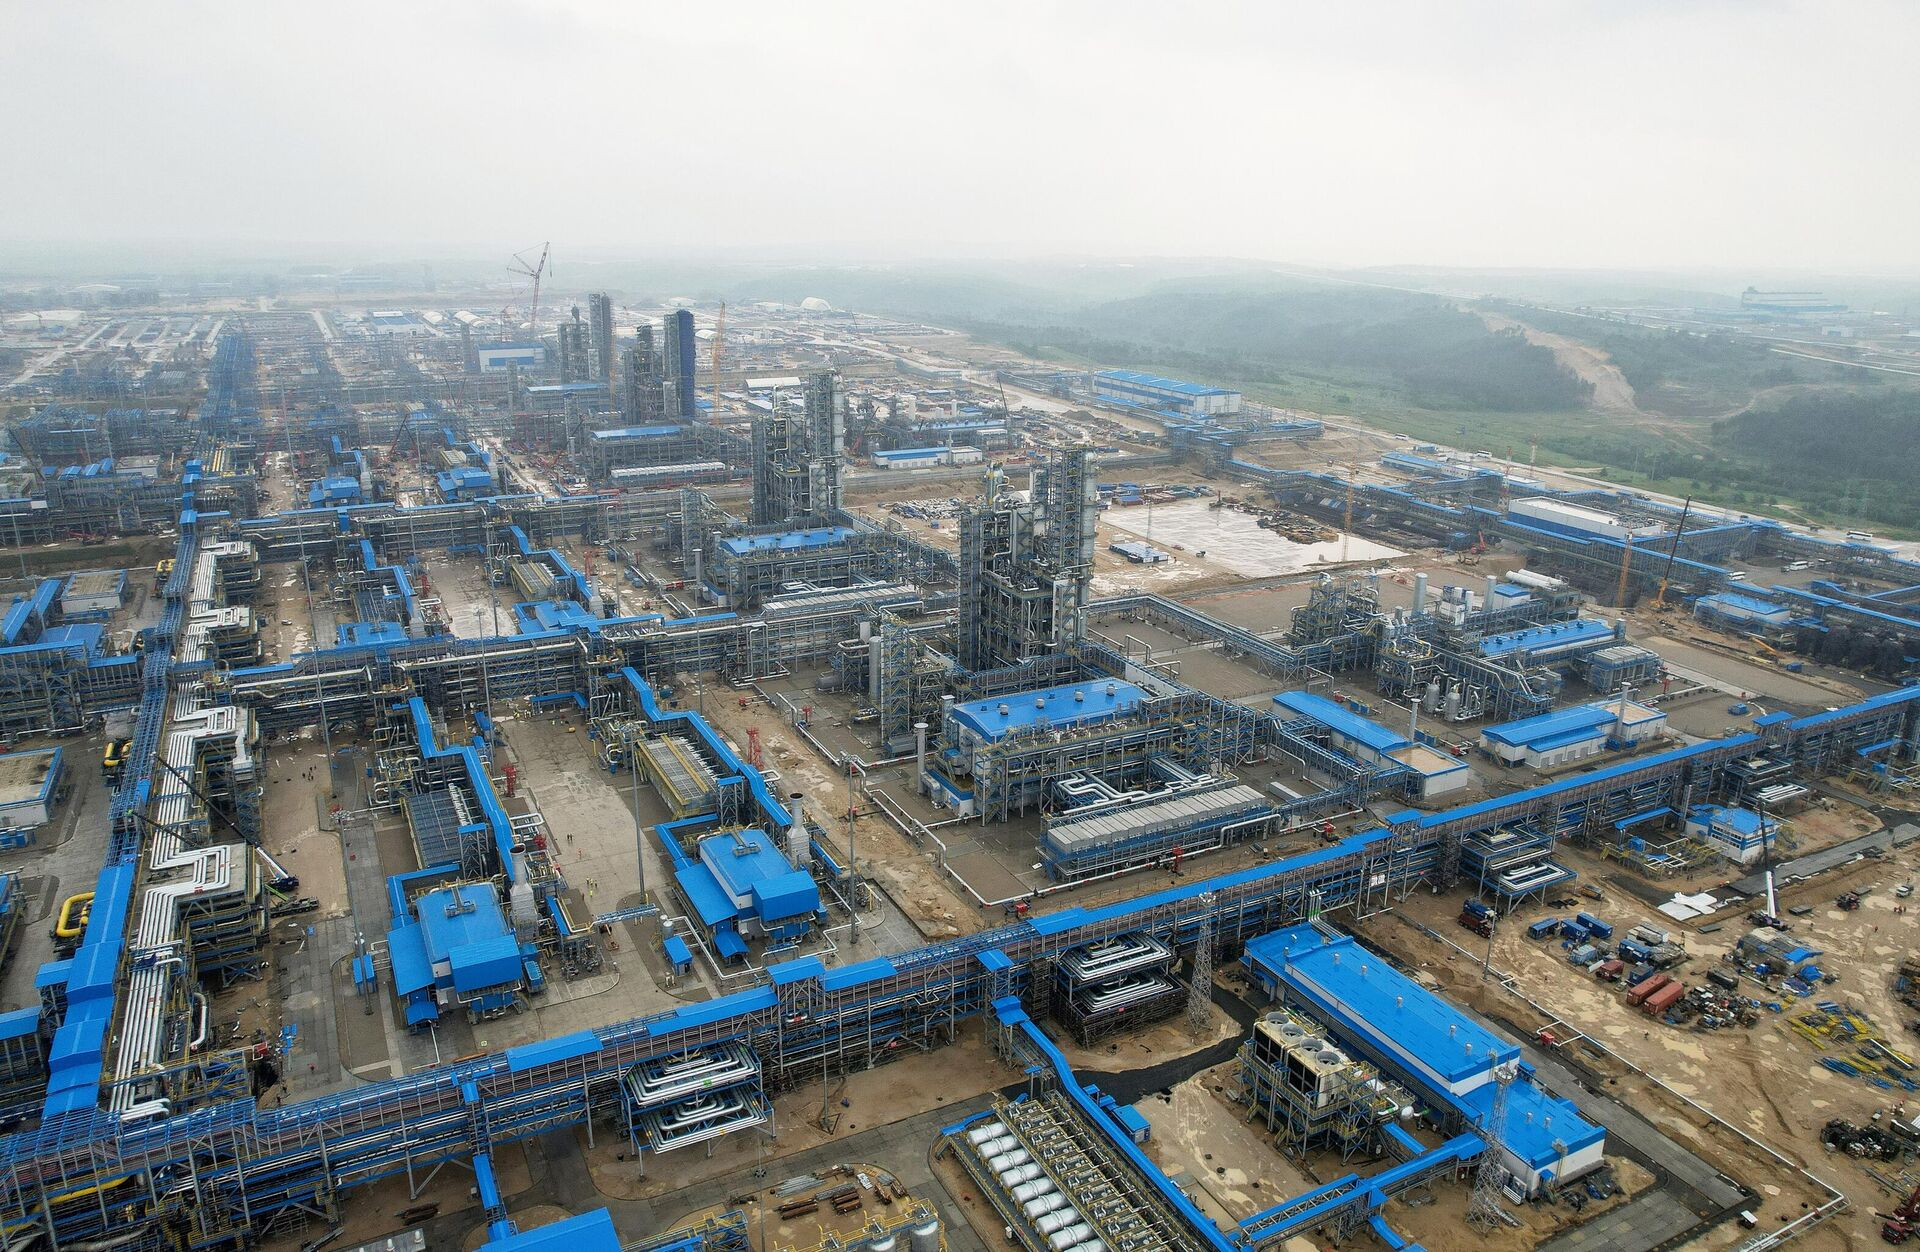 Bird's eye view of the Amur Gas Processing Plant, servicing the Power of Siberia pipeline. At full capacity, the plant can produce up to 38 million cubic meters of purified methane fraction, 2.4 million tons of ethane, 1.5 million tons of liquefied hydrocarbon gases, 200,000 tons of pentane-hexane fraction, as well as 60 million cubic meters of helium - a crucial resource for high-tech industries. - Sputnik International, 1920, 17.05.2024